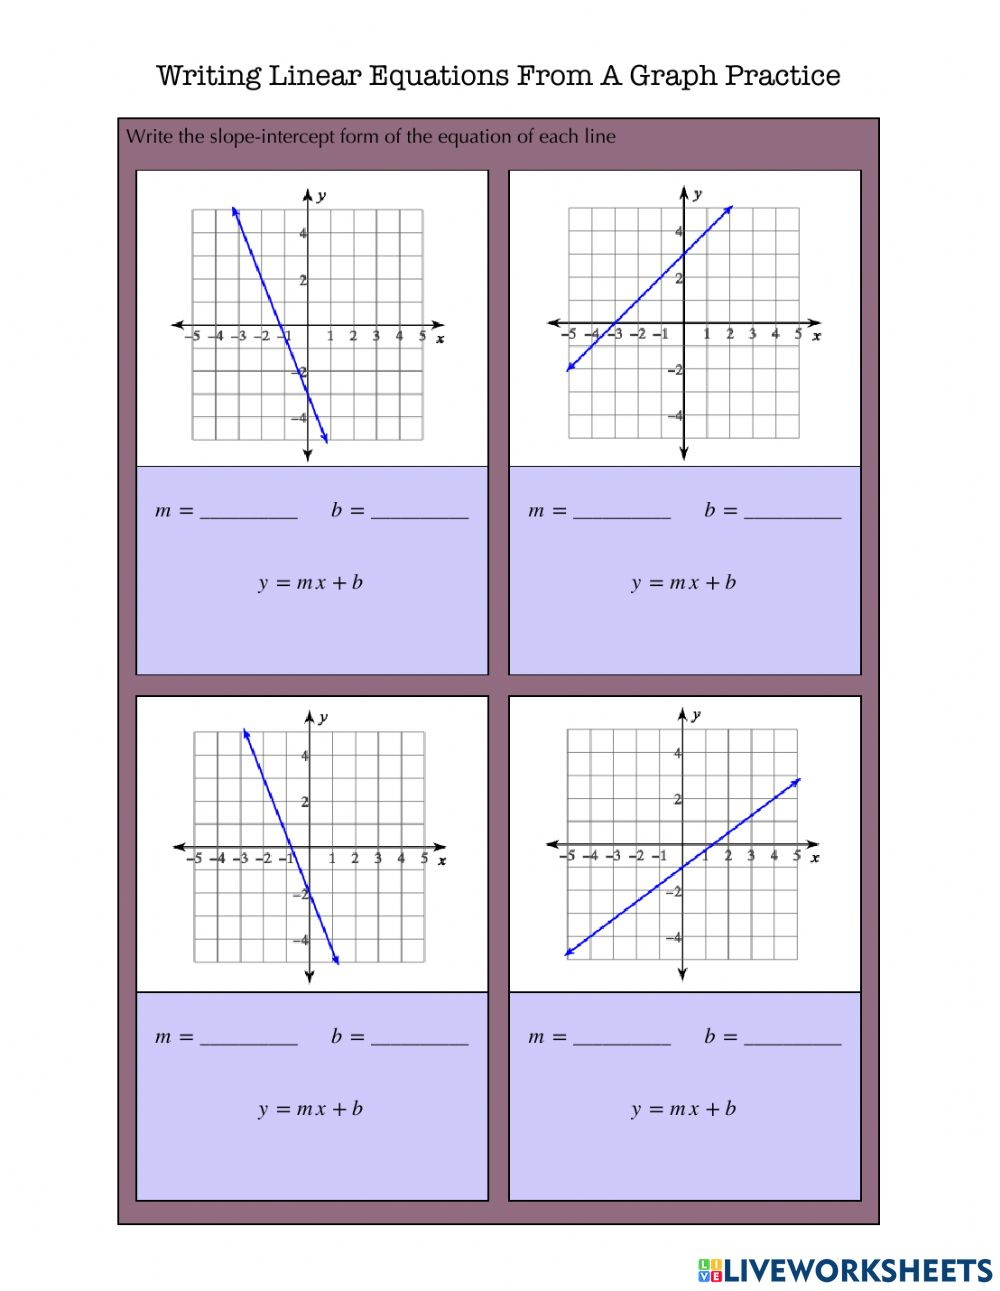 Writing Equations From A Graph Practice Worksheet